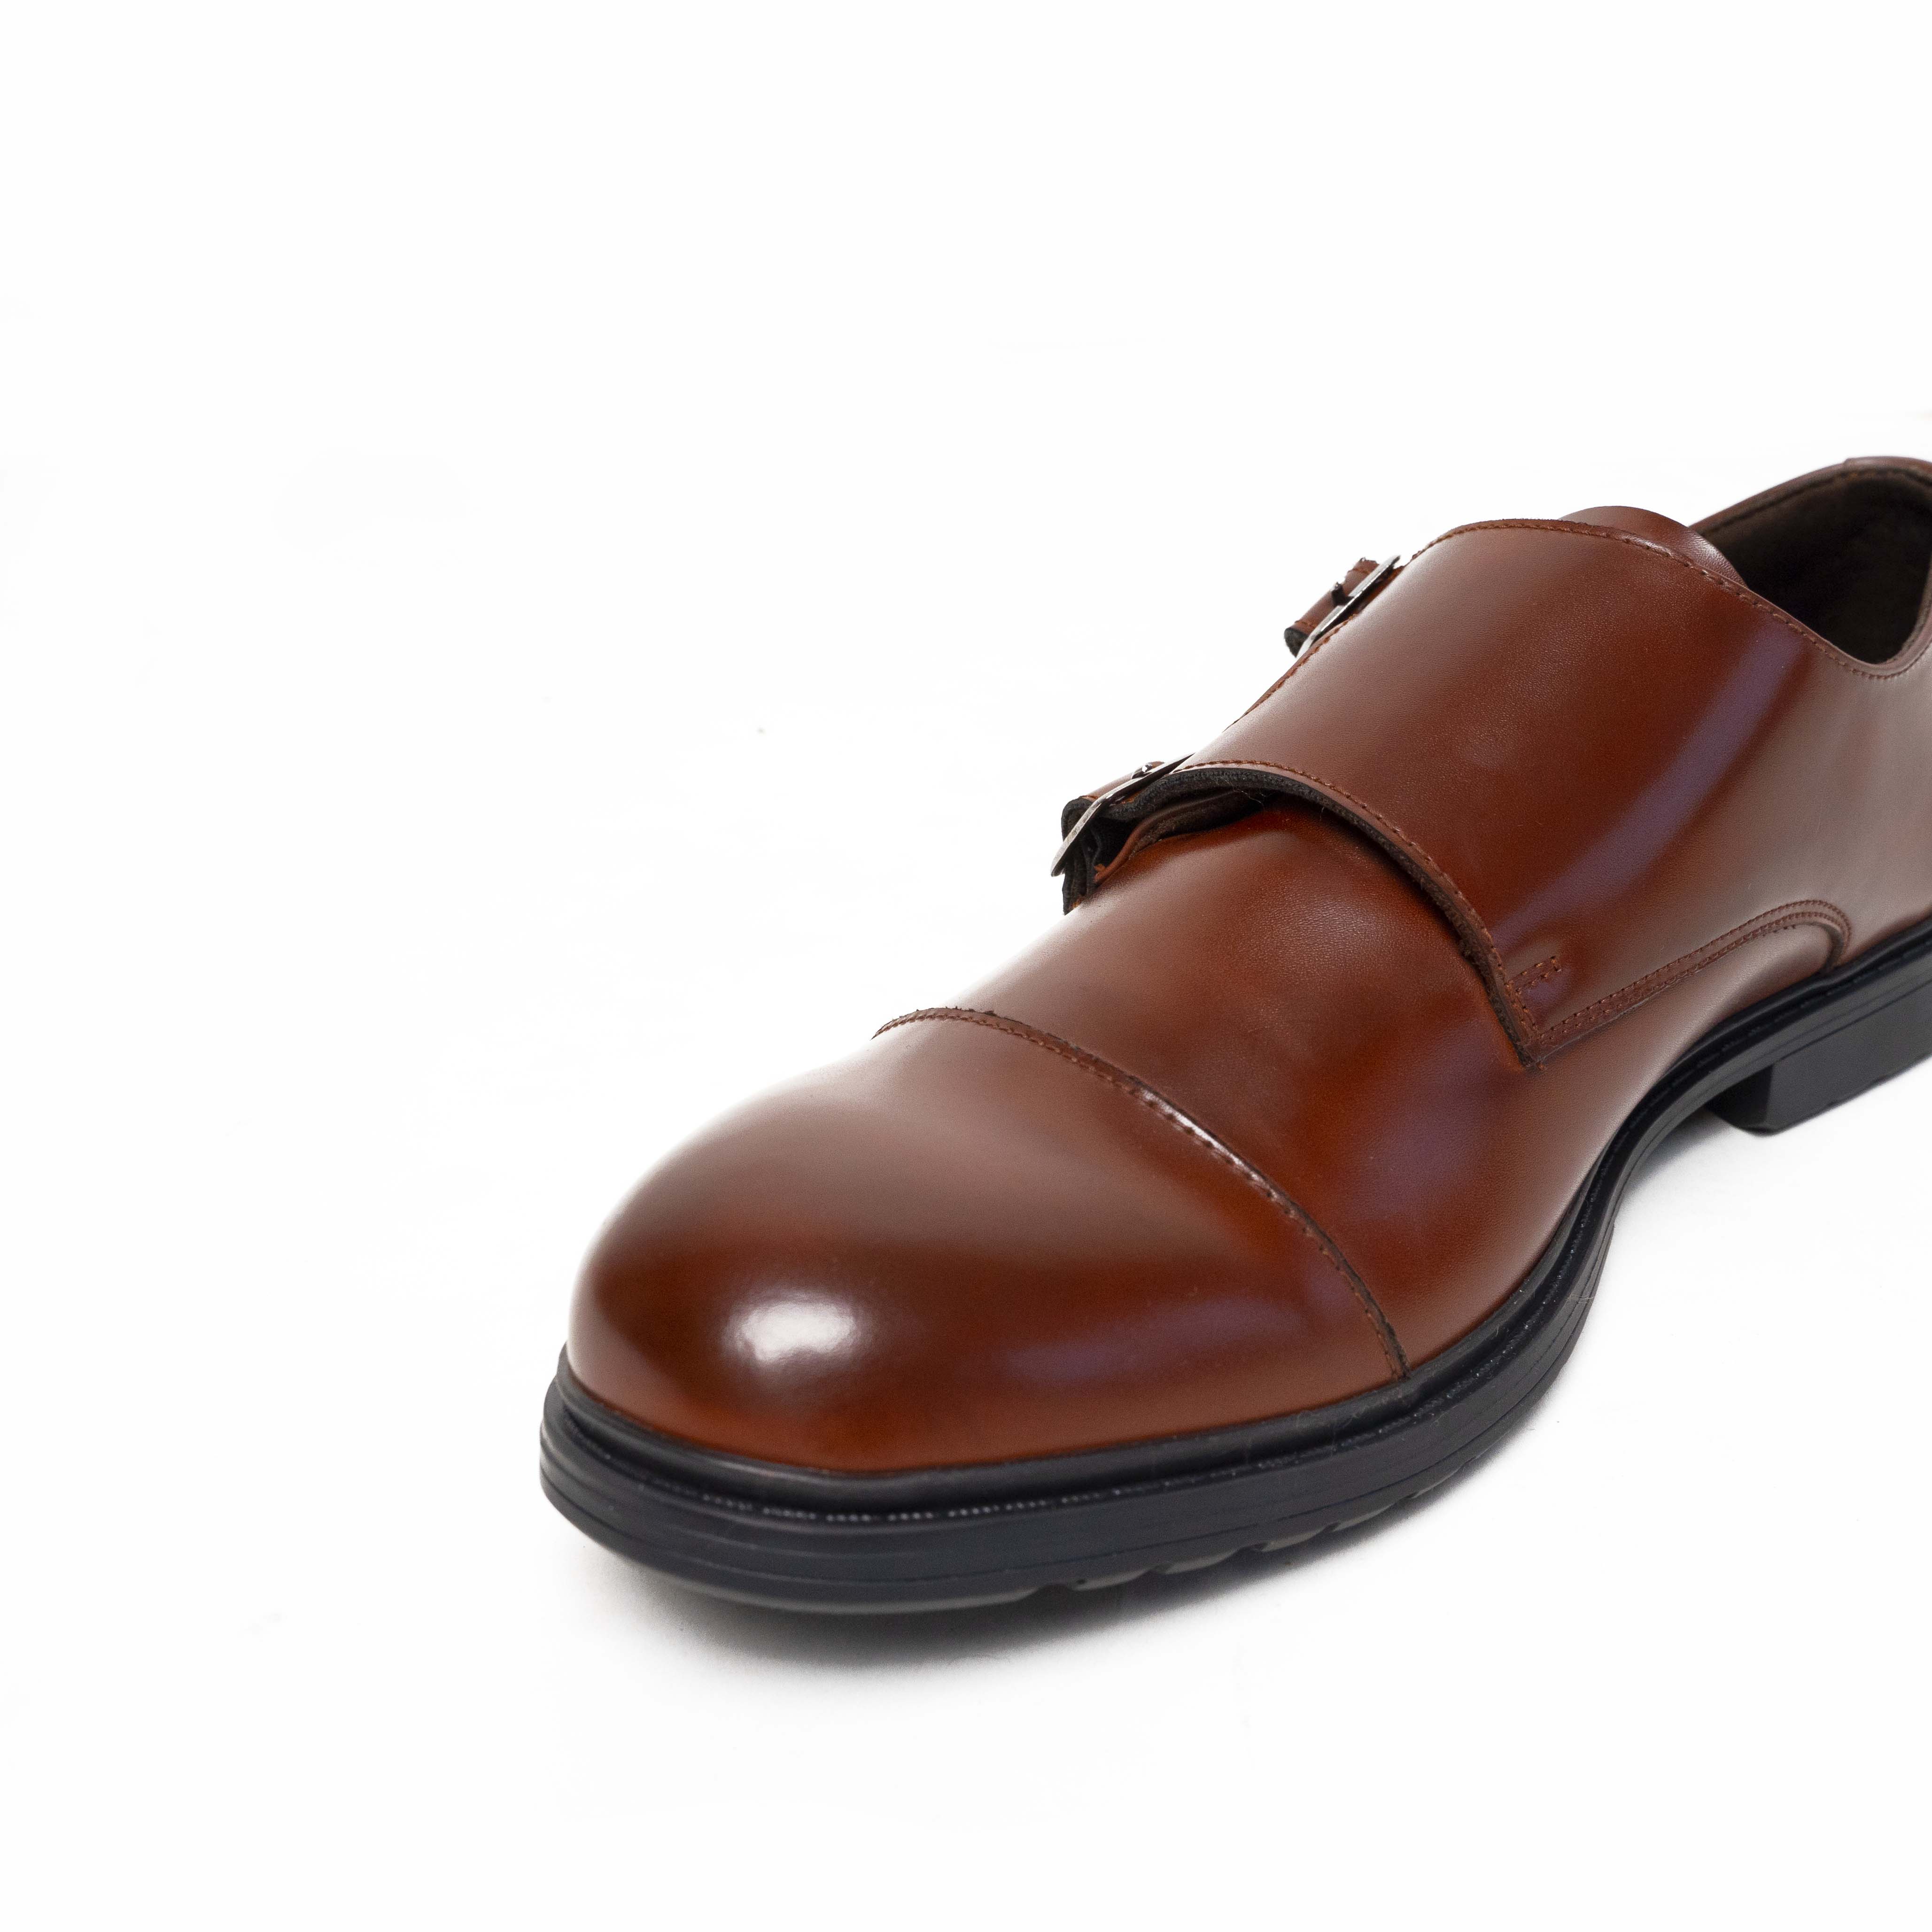 MONK STRAP LEATHER SHOES BROWN